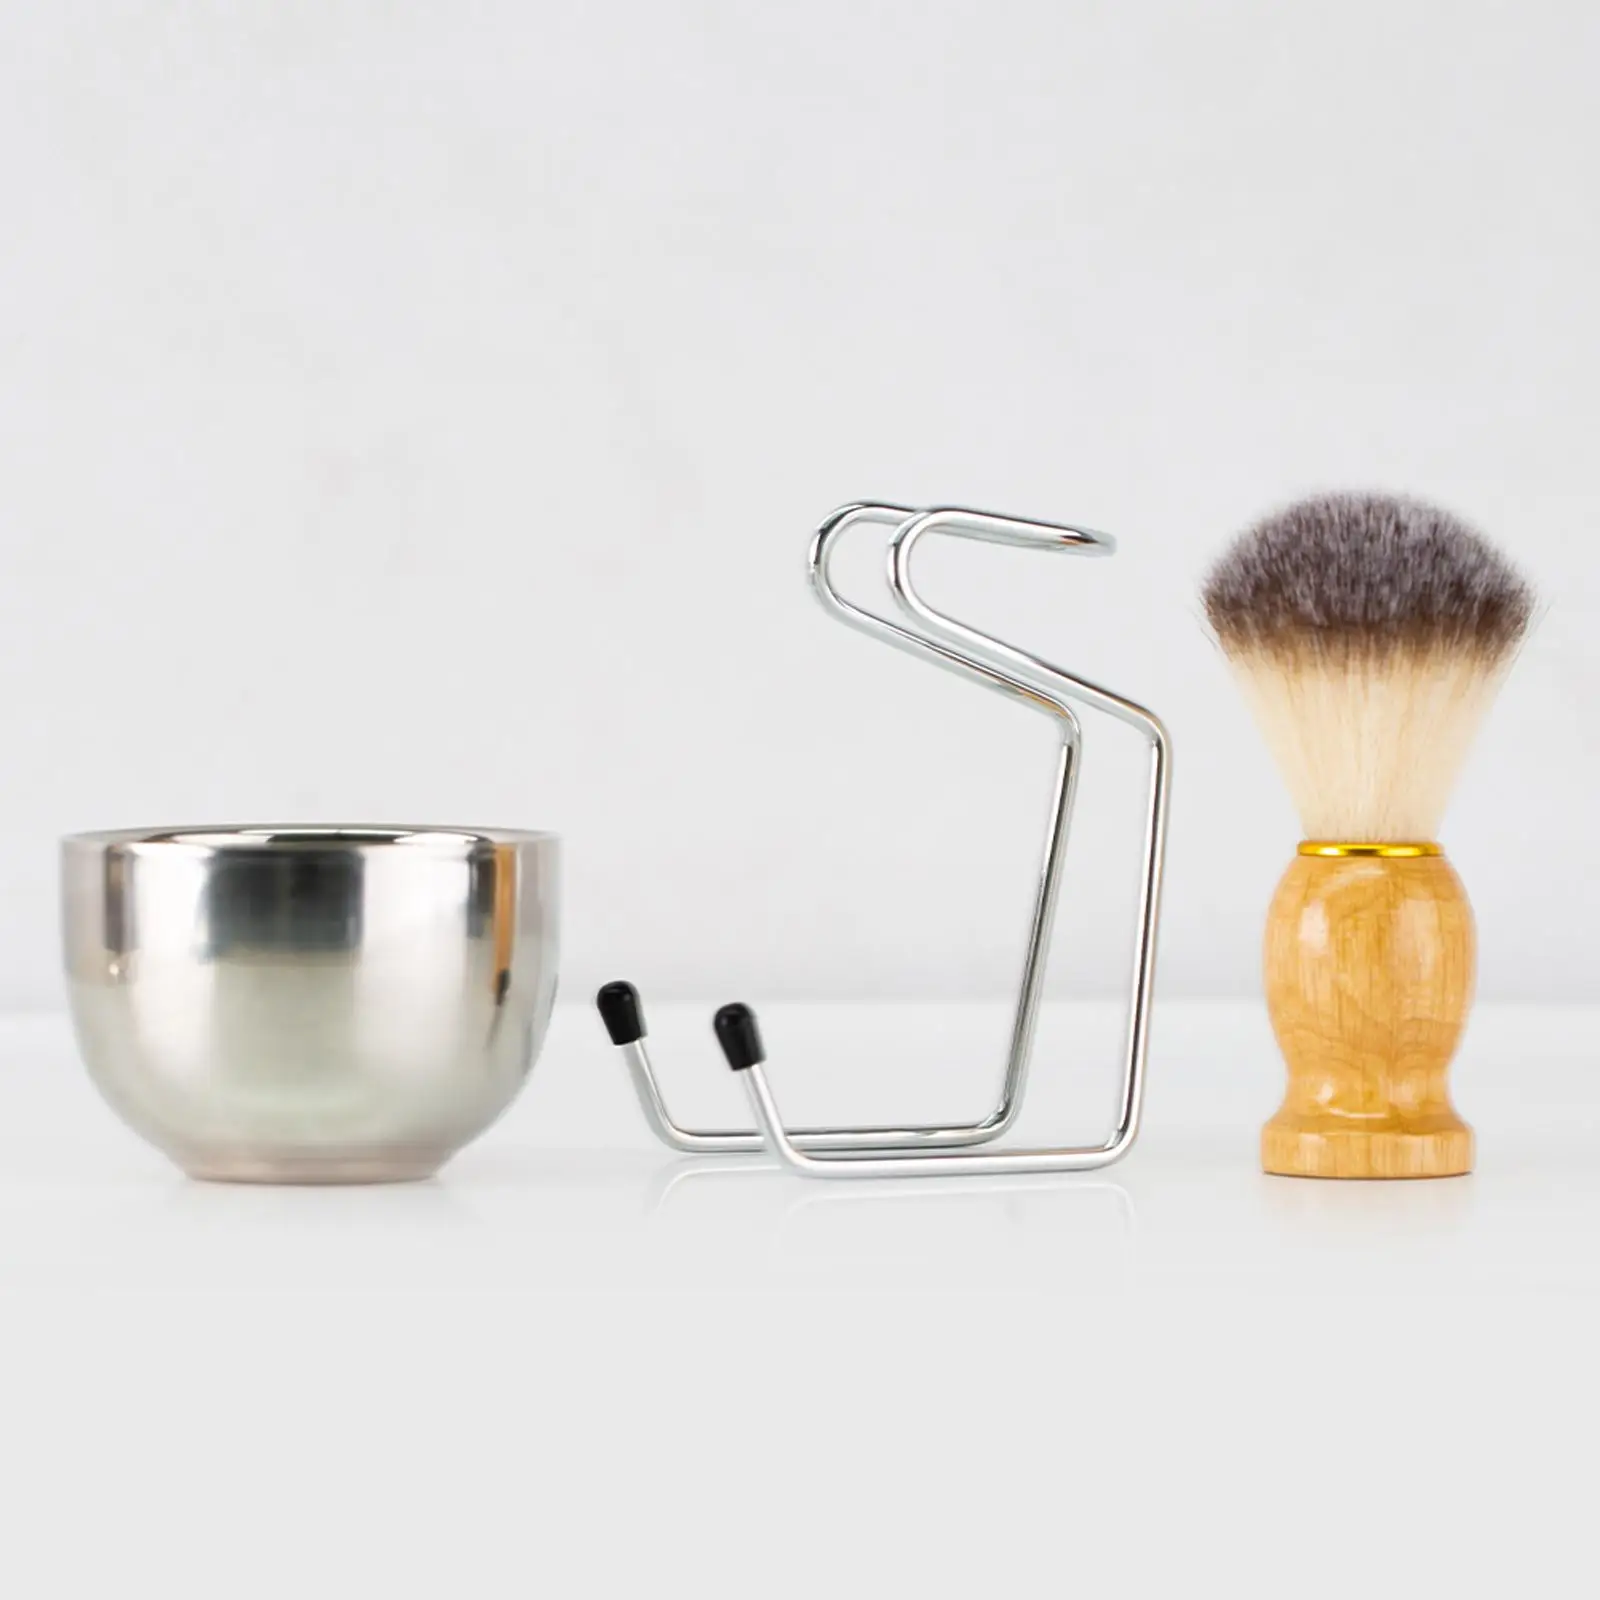 3 in 1 Wet Shaving Kit with Shave Brush Stand Mug Dia 82mm Bowl Universal